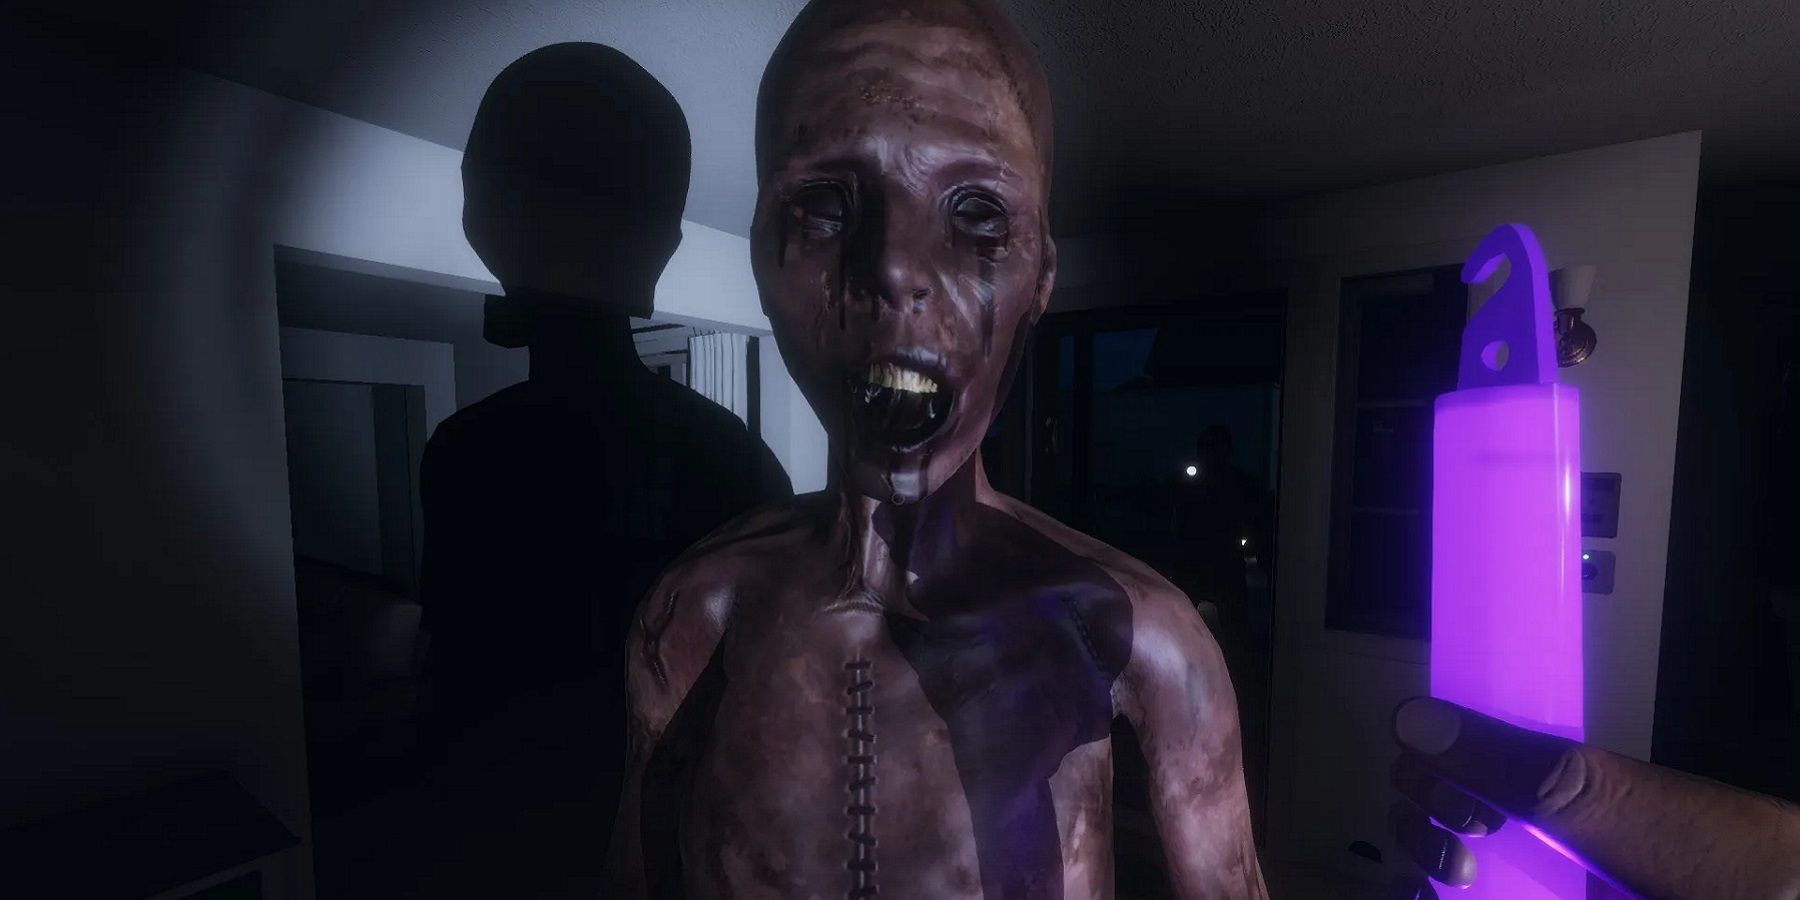 Screenshot from Phasmophobia showing a creepy looking being right up close to the player.